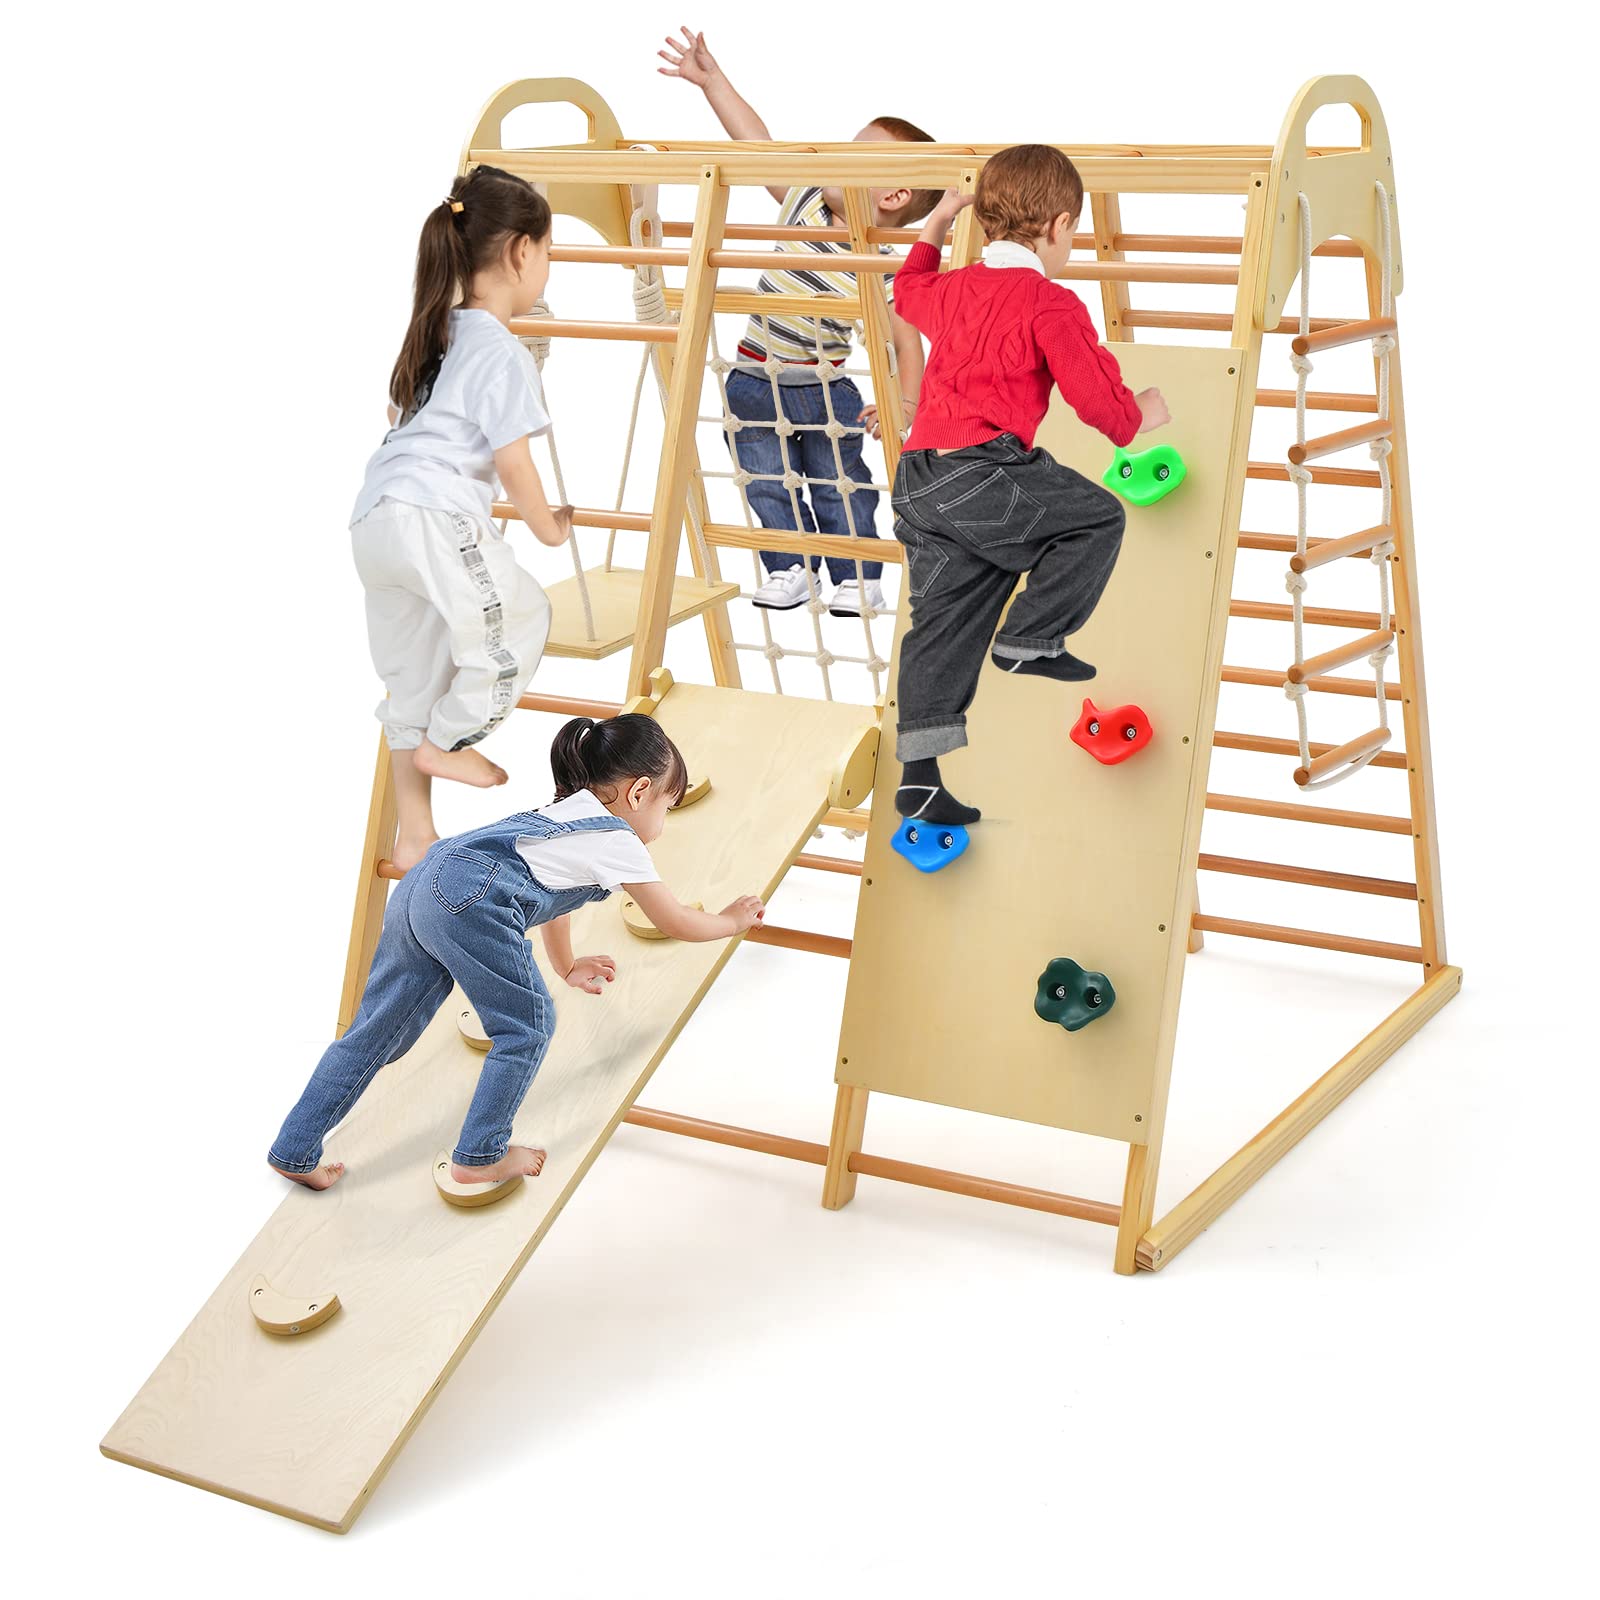 INFANS 8 in 1 Climbing Toys for Toddlers, Kids Wood Montessori Climber Playset, Indoor Playground Jungle Gym